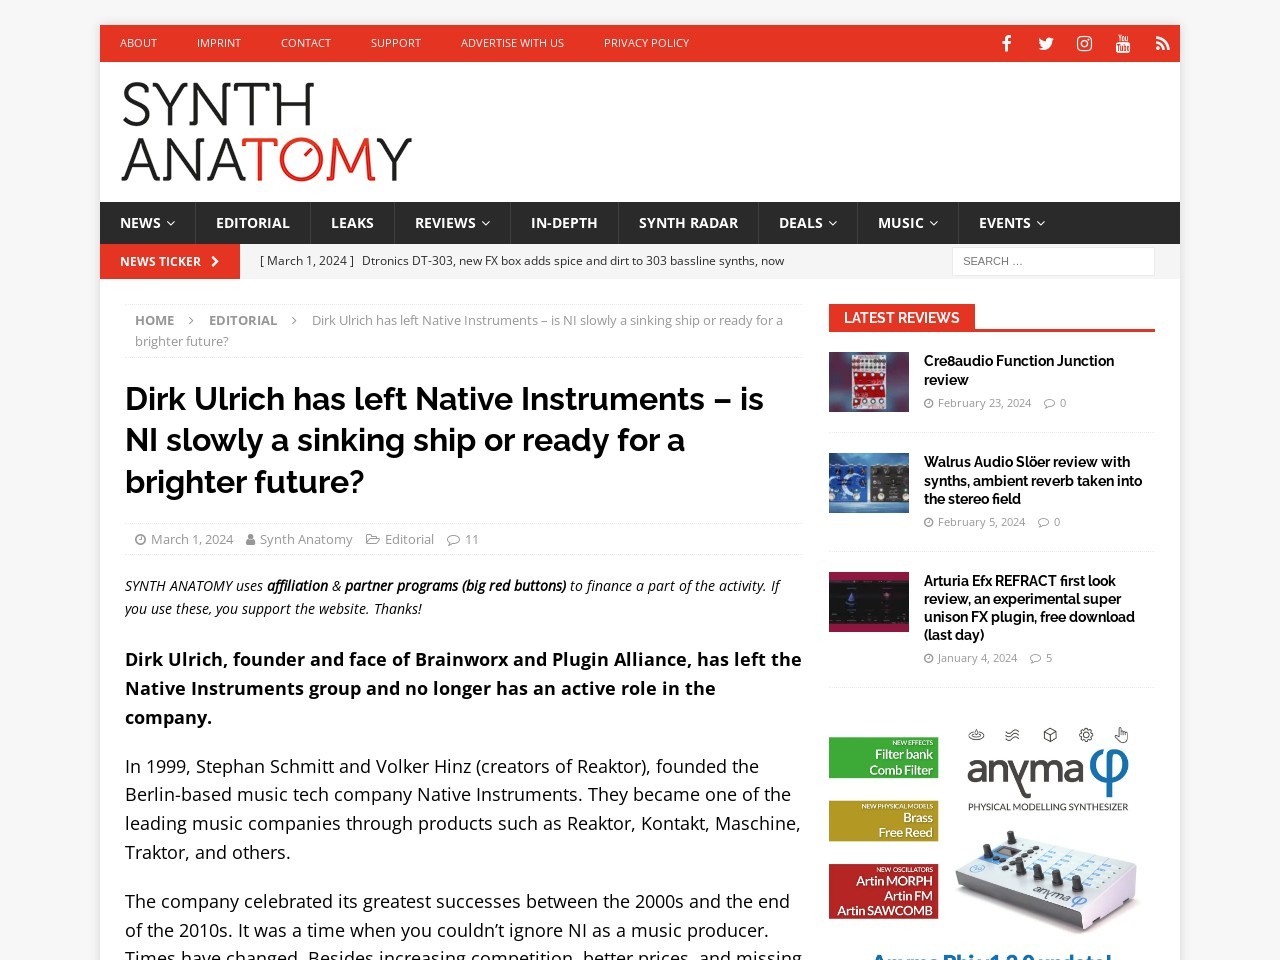 Dirk Ulrich has left Native Instruments - is NI slowly a sinking ship or ready for a brighter future? - SYNTH ANATOMY